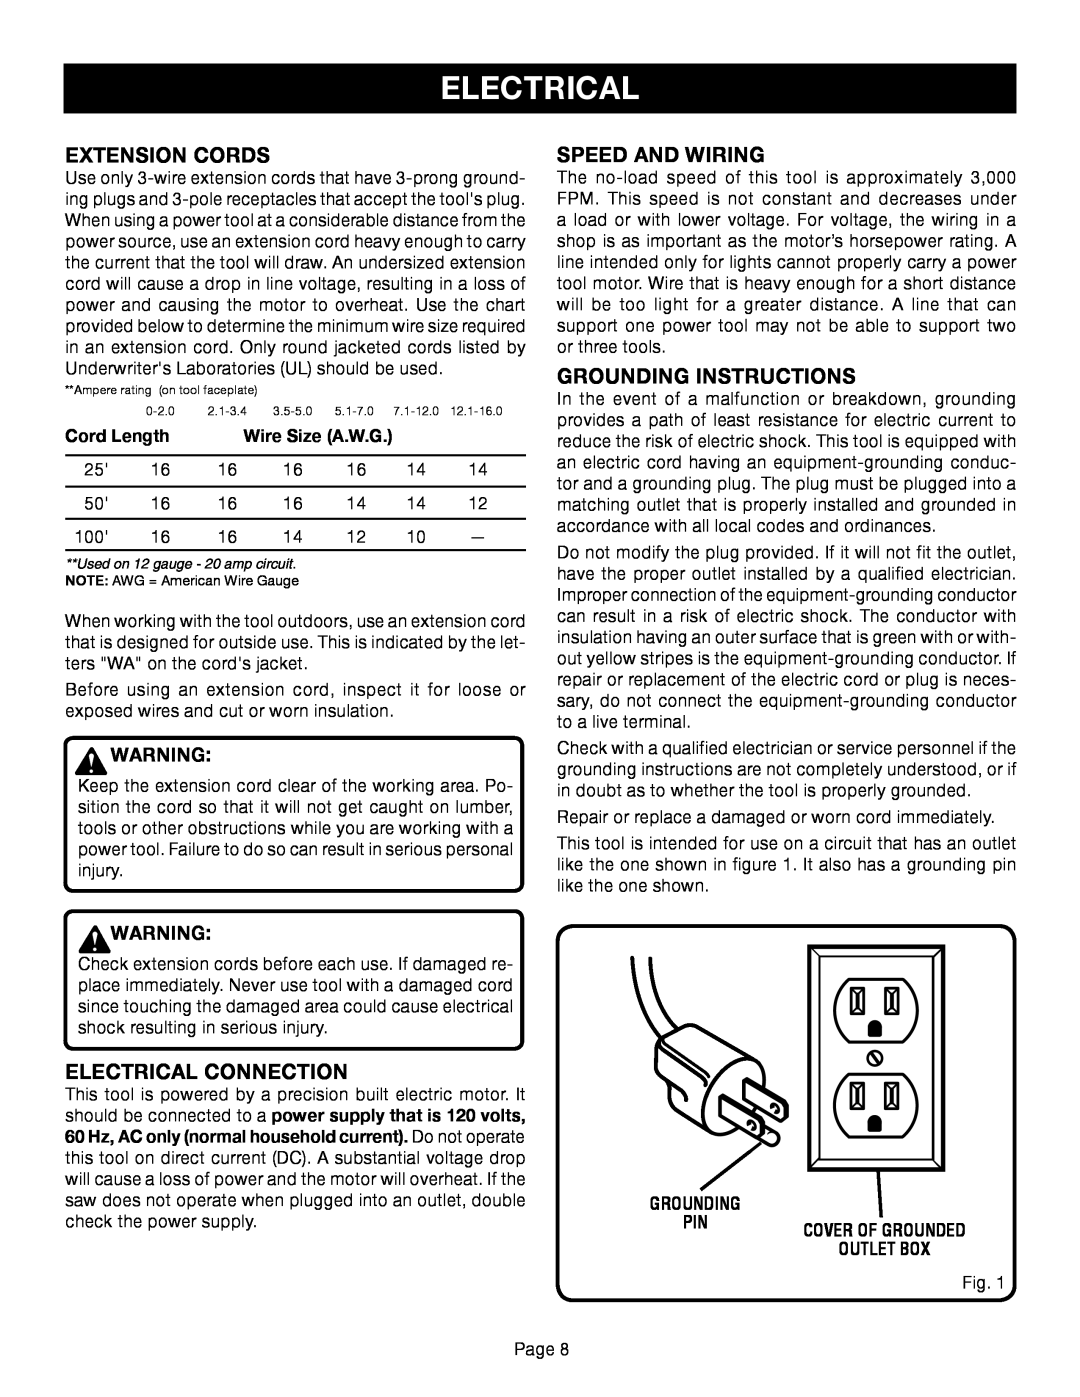 Ryobi BS1001SV manual Extension Cords, Speed And Wiring, Grounding Instructions, Electrical Connection, Cord Length 